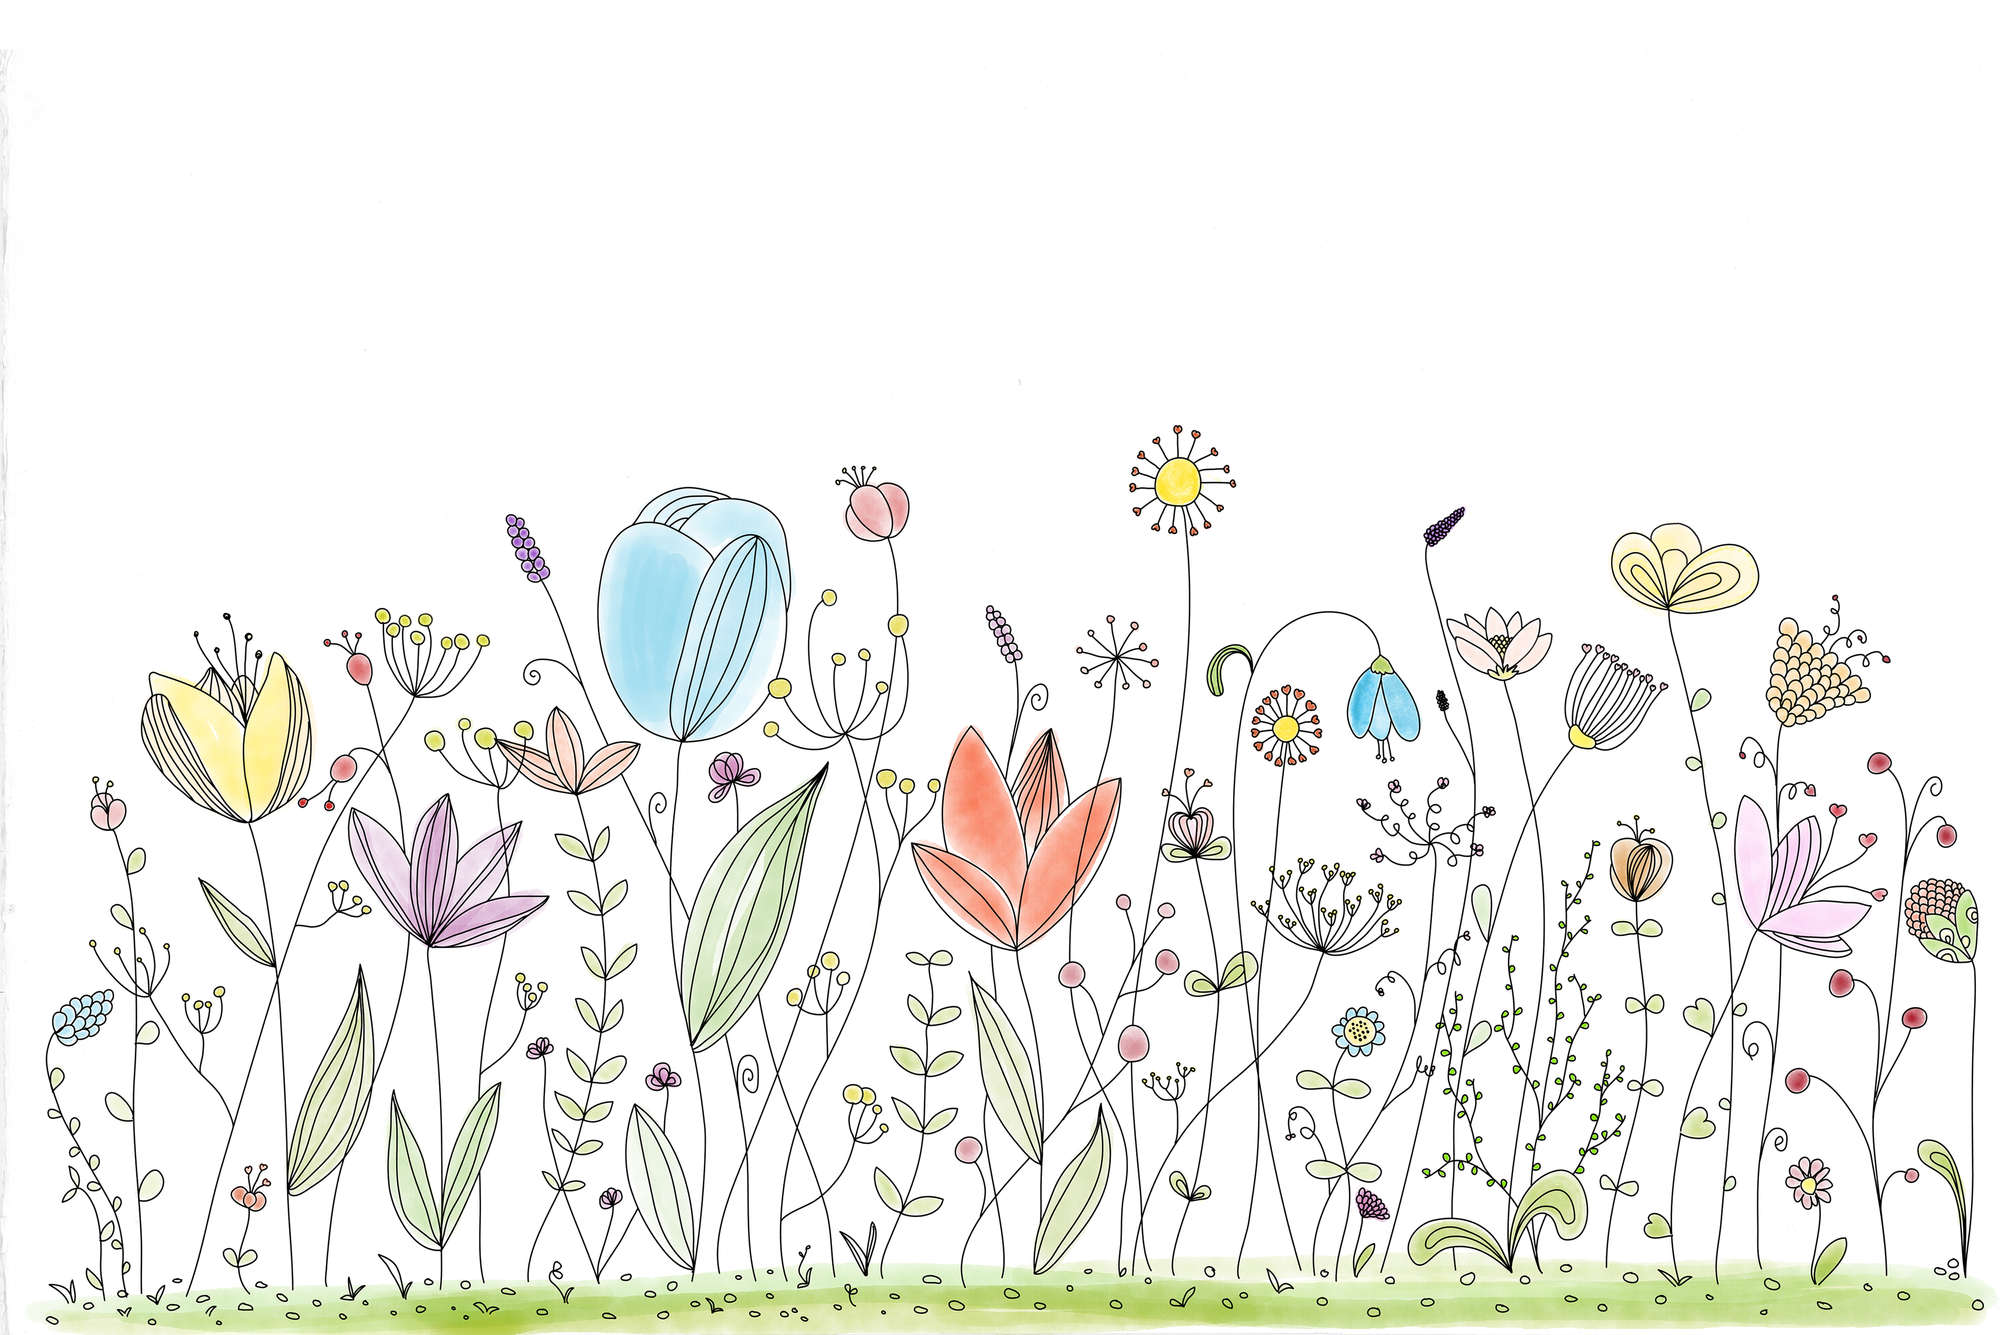             Kids mural with colourful drawn flowers on premium smooth non-woven fabric
        